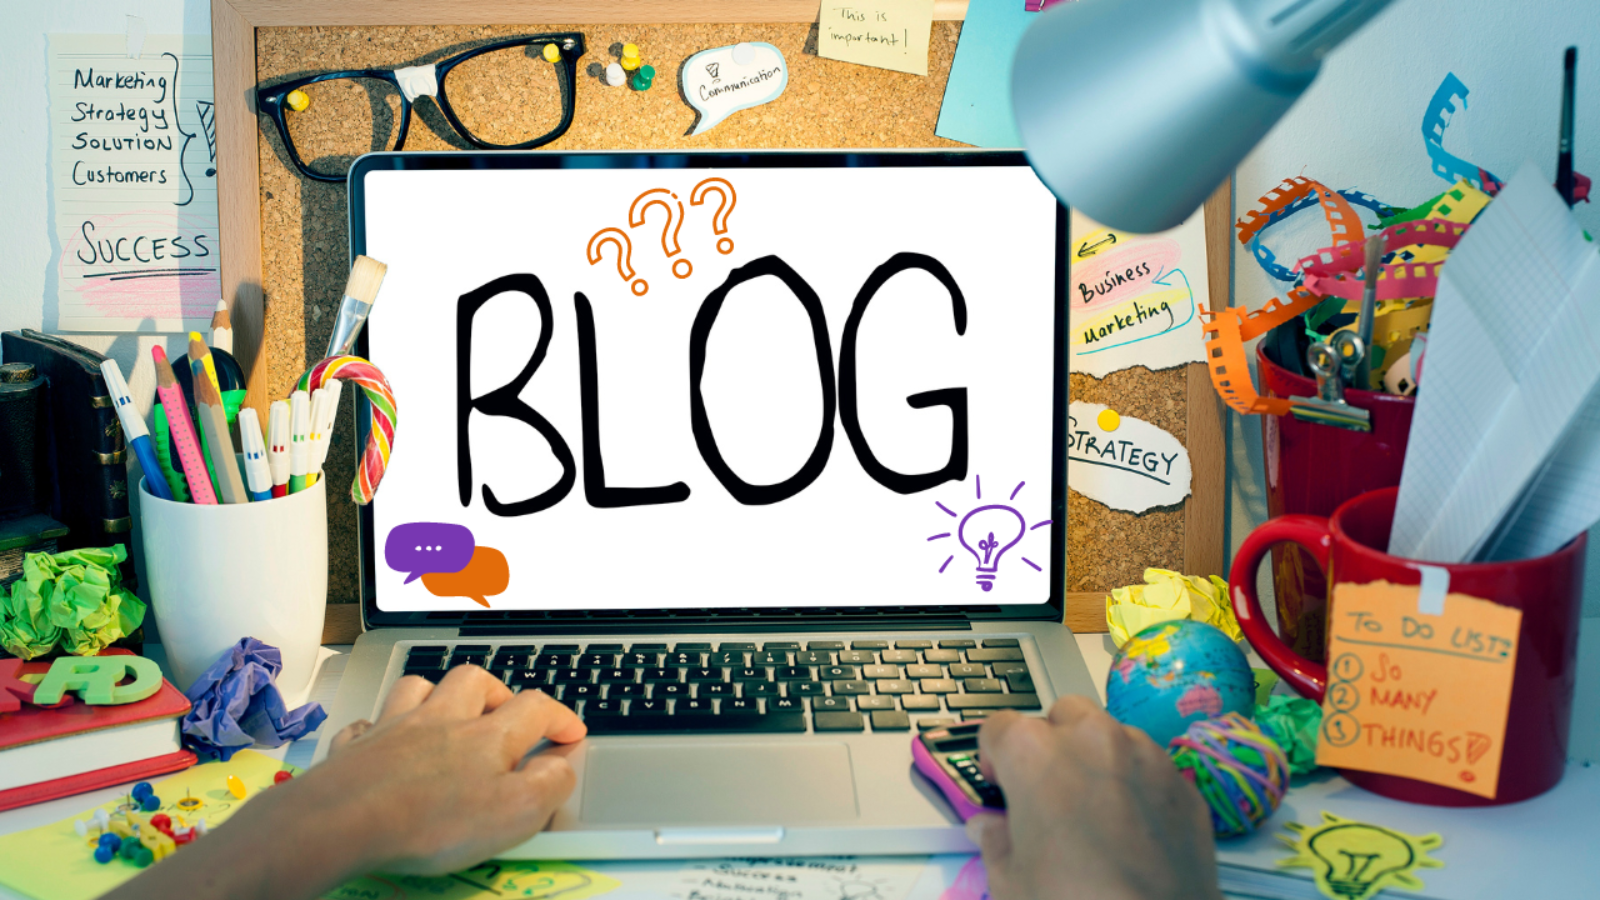 4 Reasons to Create a Blog Page on Your Website